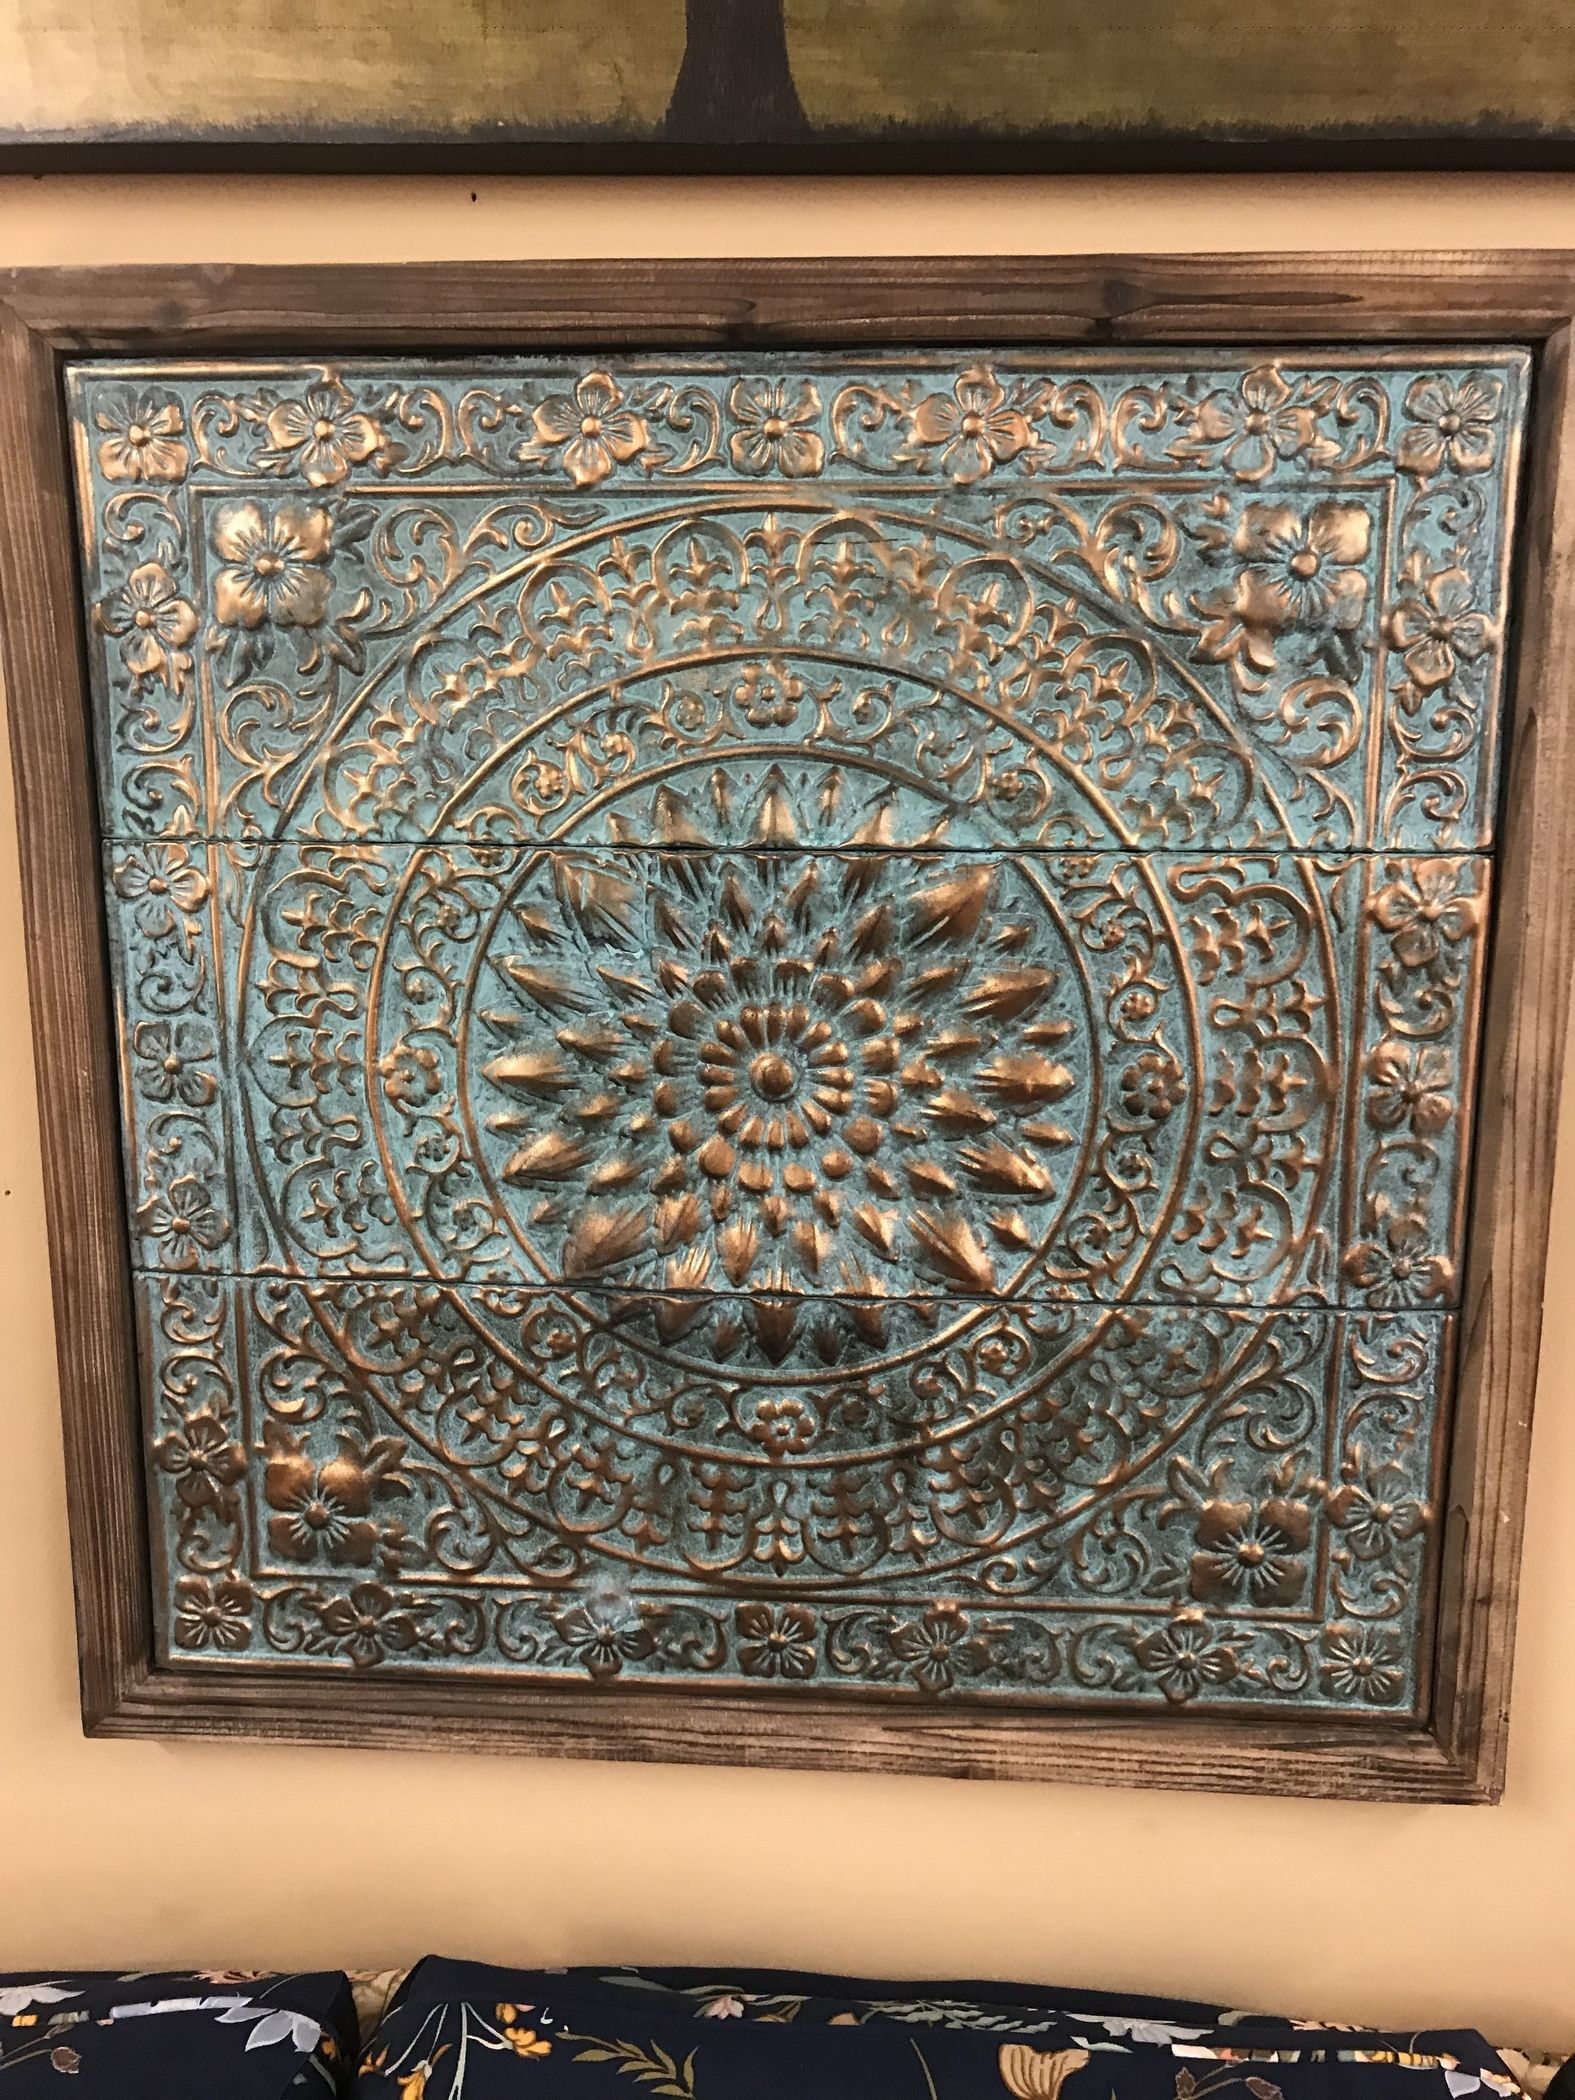 Stamped Metal Wall Decor | Delmarva Furniture Consignment With Regard To Most Recently Released Wooden Blocks Metal Wall Art (View 2 of 20)